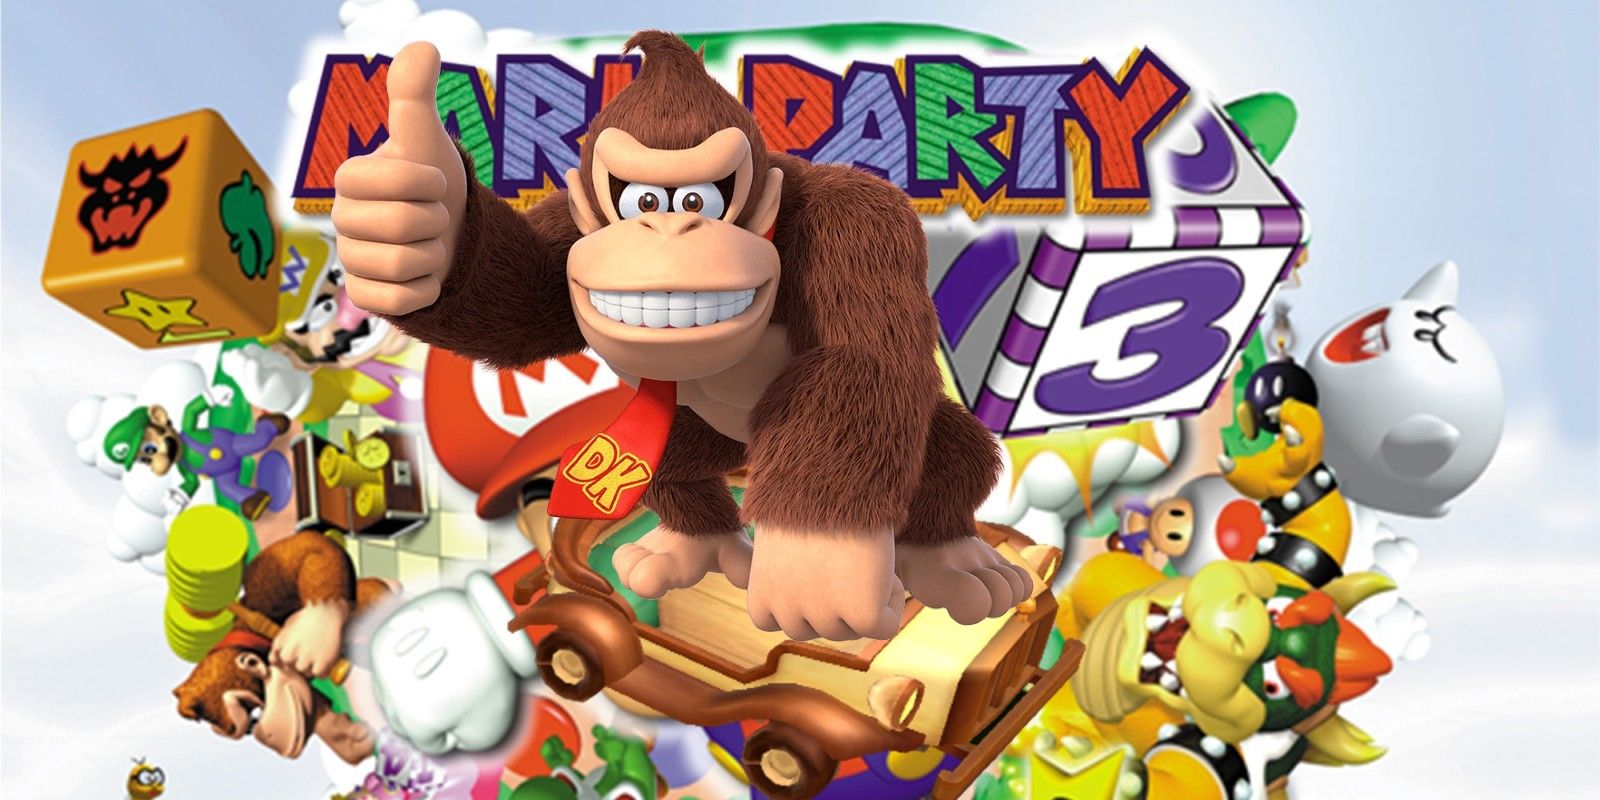 Donkey Kong on a car from Mario Party 9 in front of the Mario Party logo